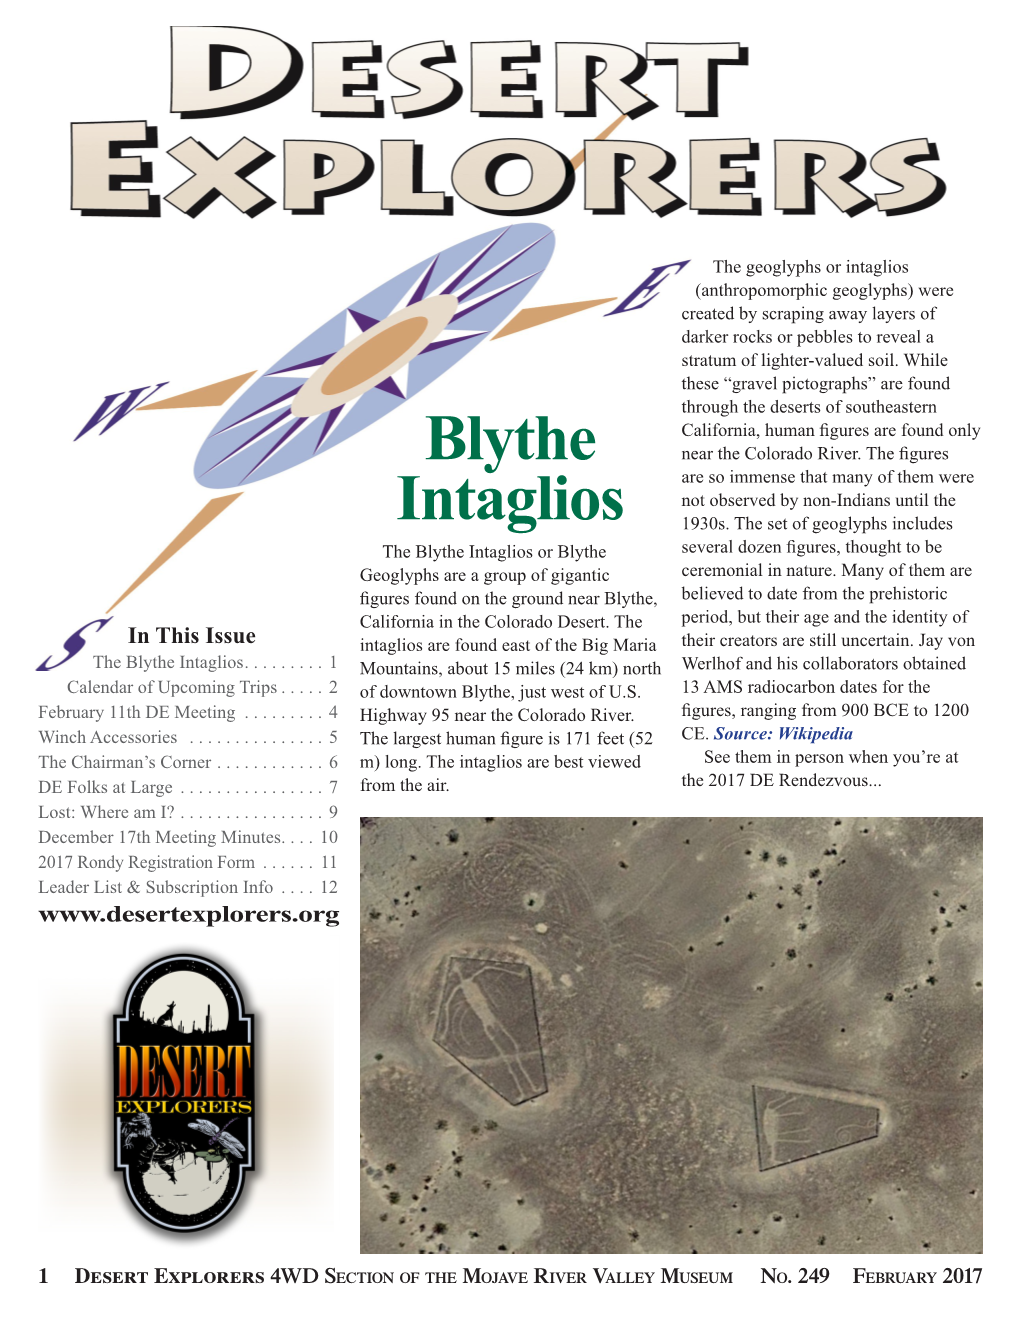 Blythe Intaglios Or Blythe Several Dozen Figures, Thought to Be Geoglyphs Are a Group of Gigantic Ceremonial in Nature